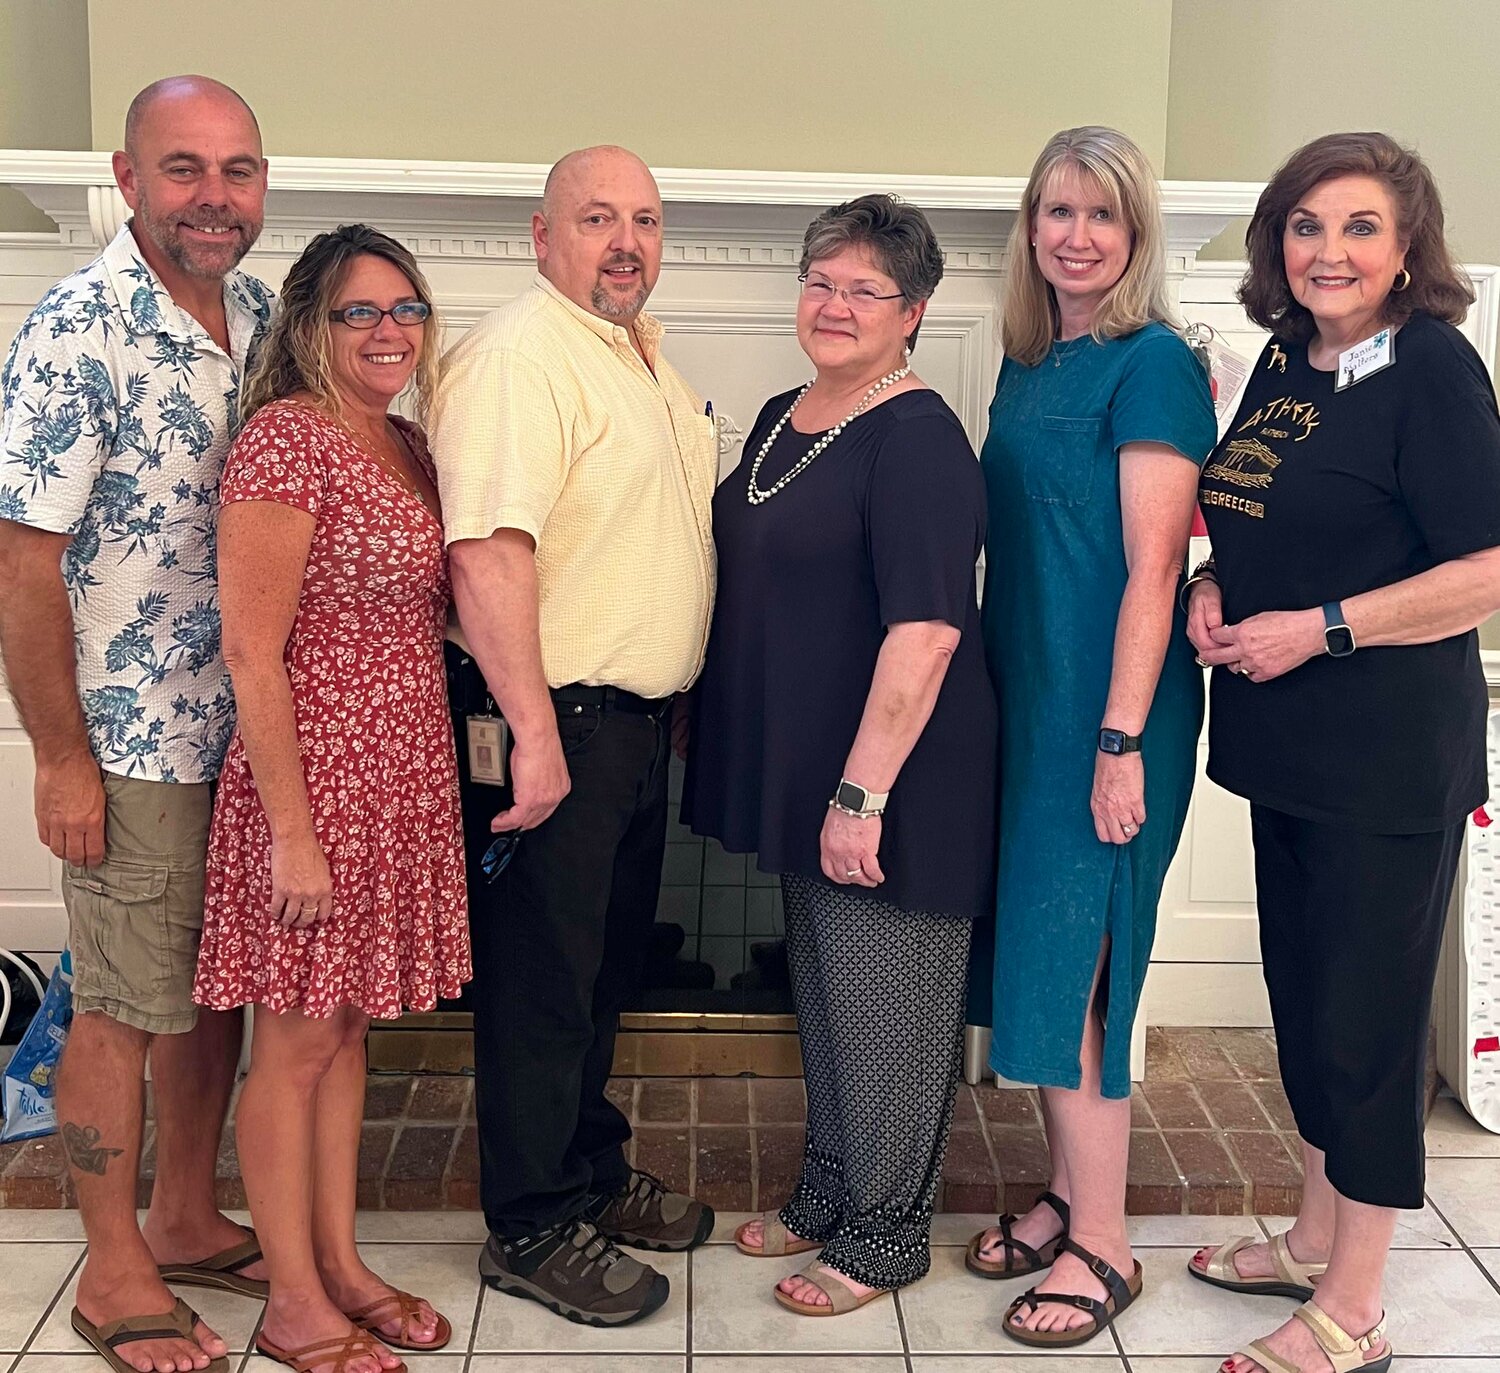 Pictured from left are hostesses and guest Matt Kostos, Amy Kostos, Wes Holsapple, Jr., Sherrie Holsapple, Wendy Greif, and Janie Walters.